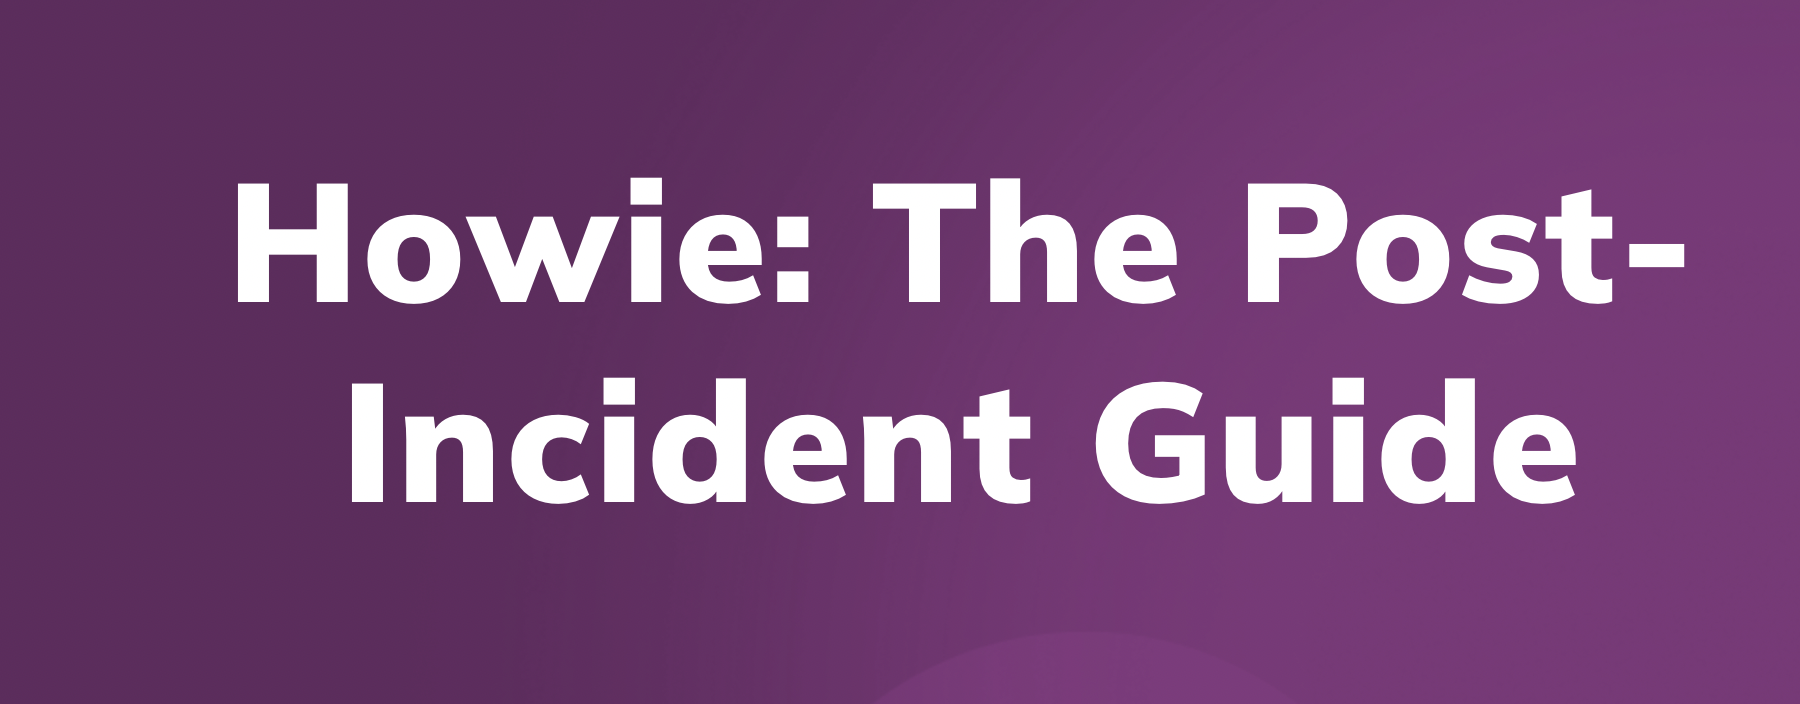 Howie: The Post-Incident Guide